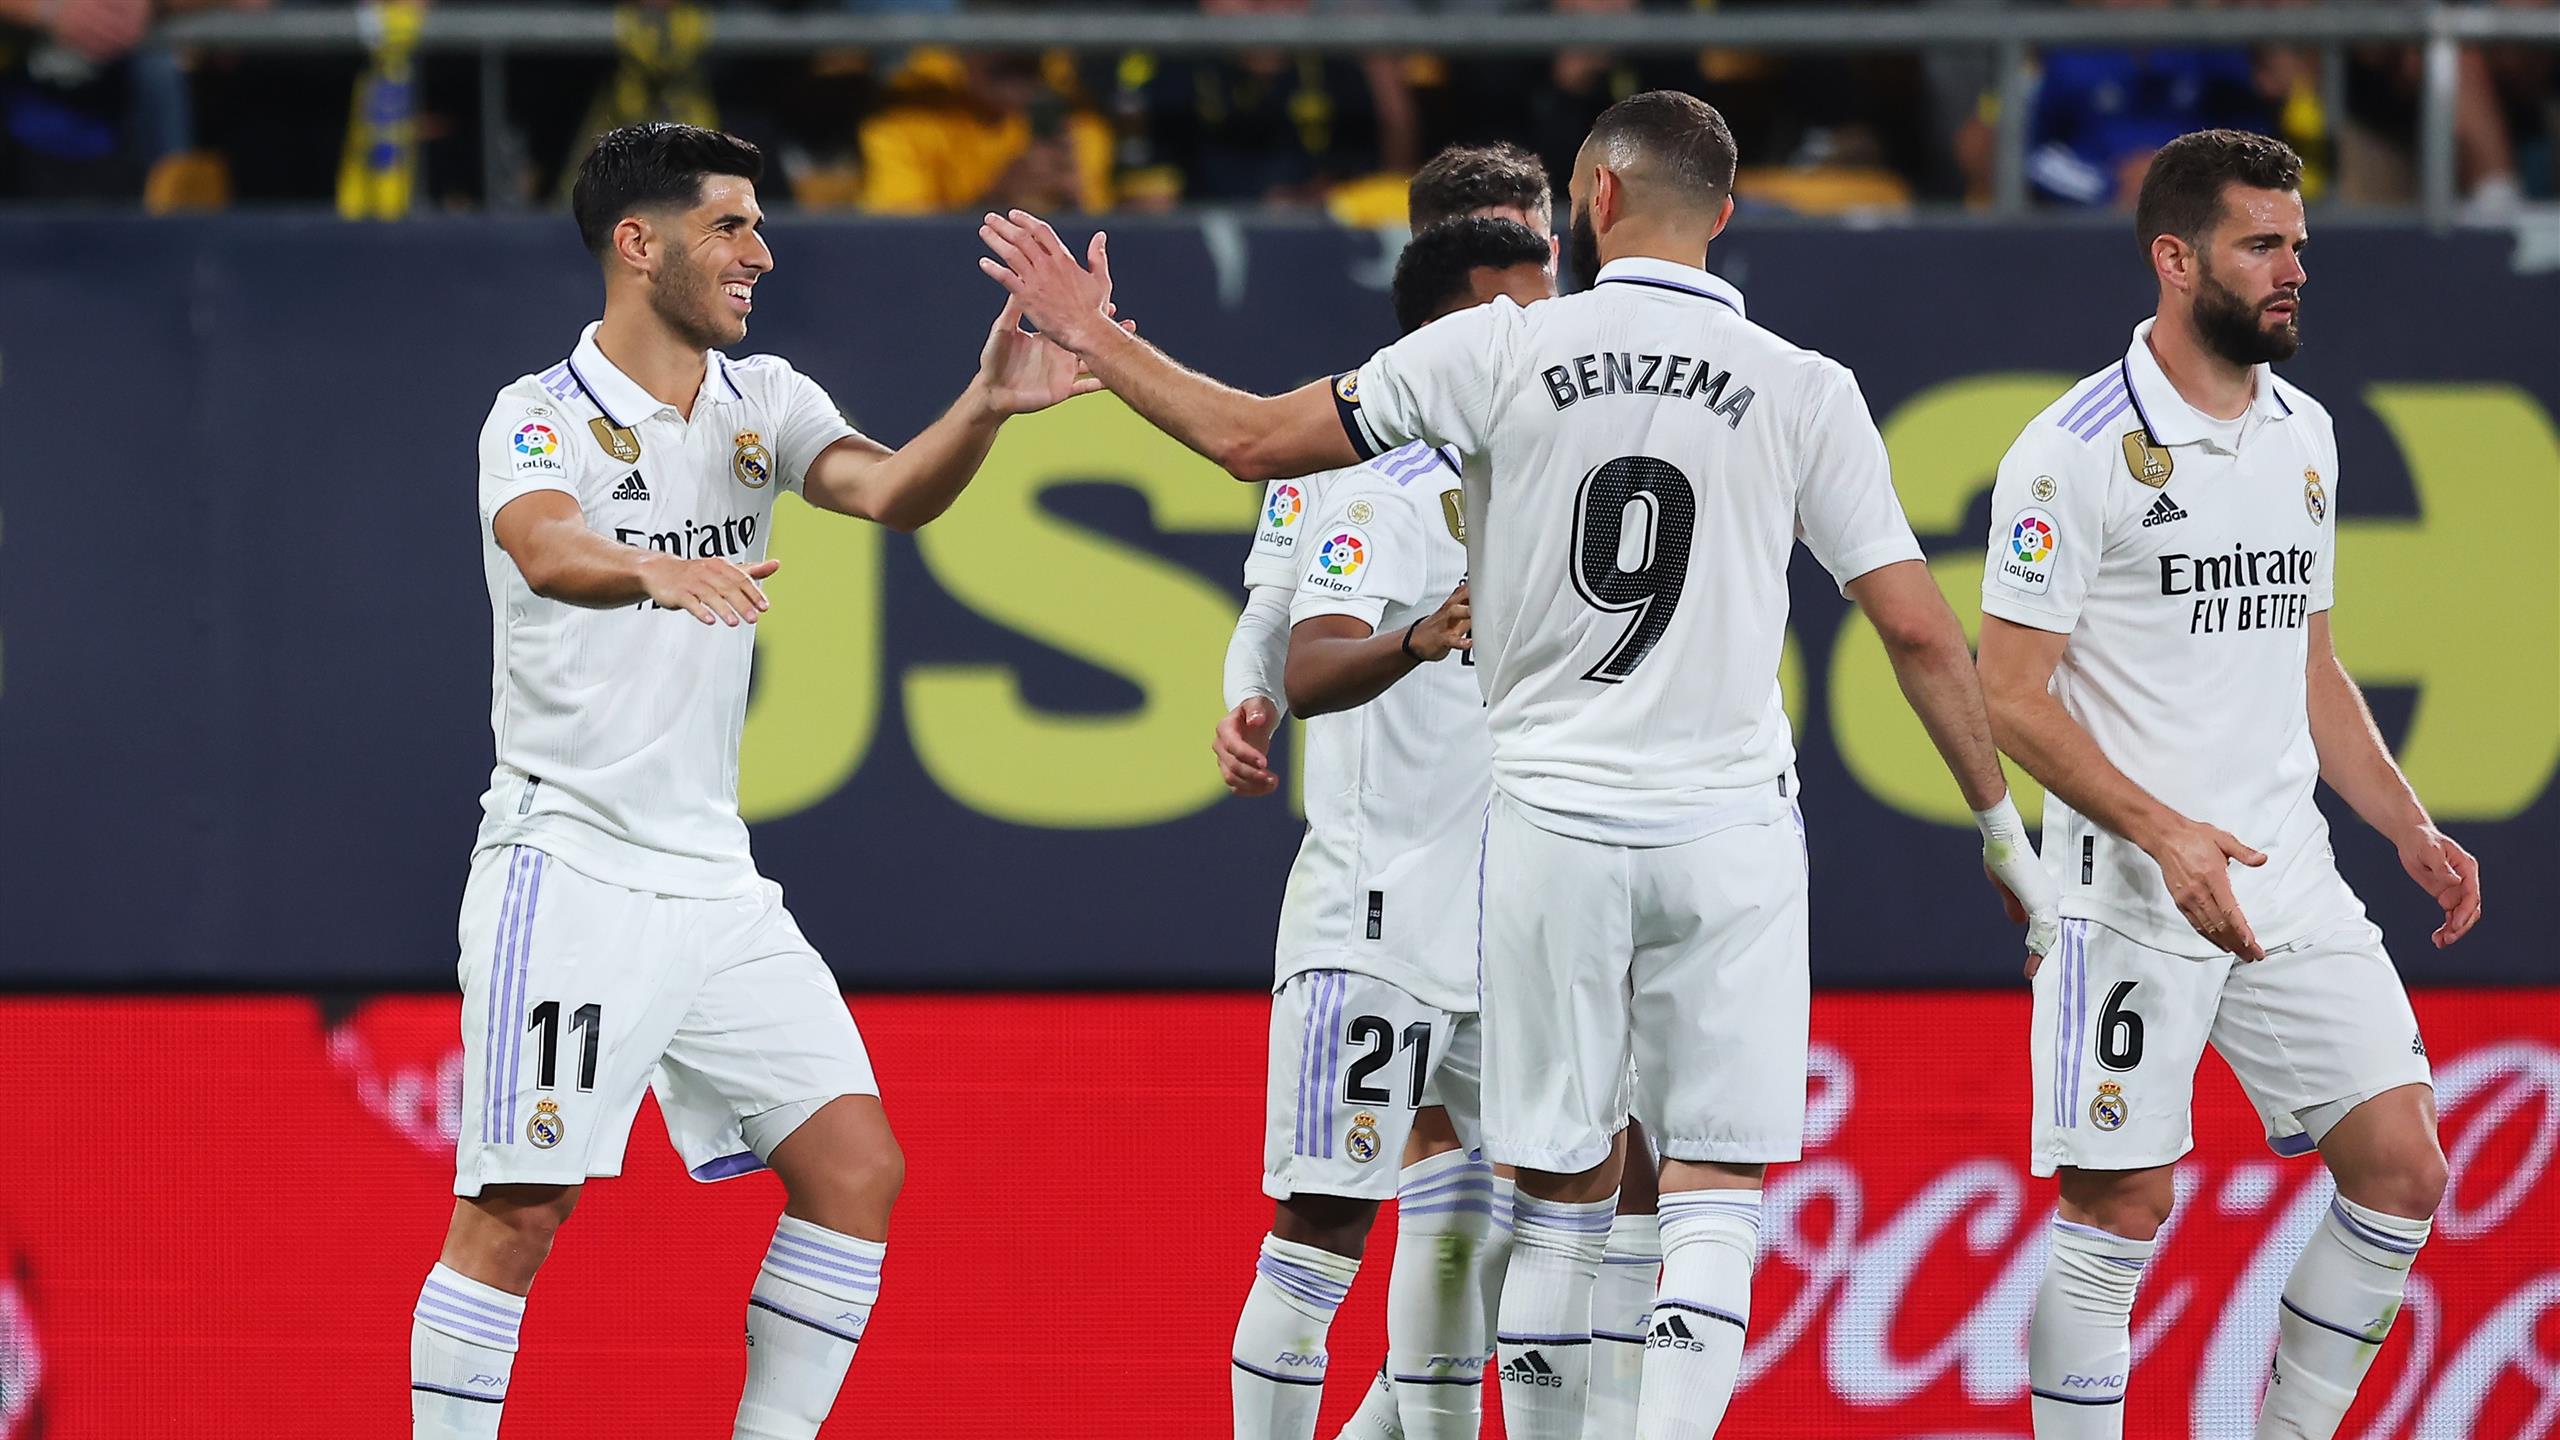 Real Madrid-Cádiz is striving to win to move us closer to the league title. - Real Madrid-Cádiz upcoming fixture anticipation and importance